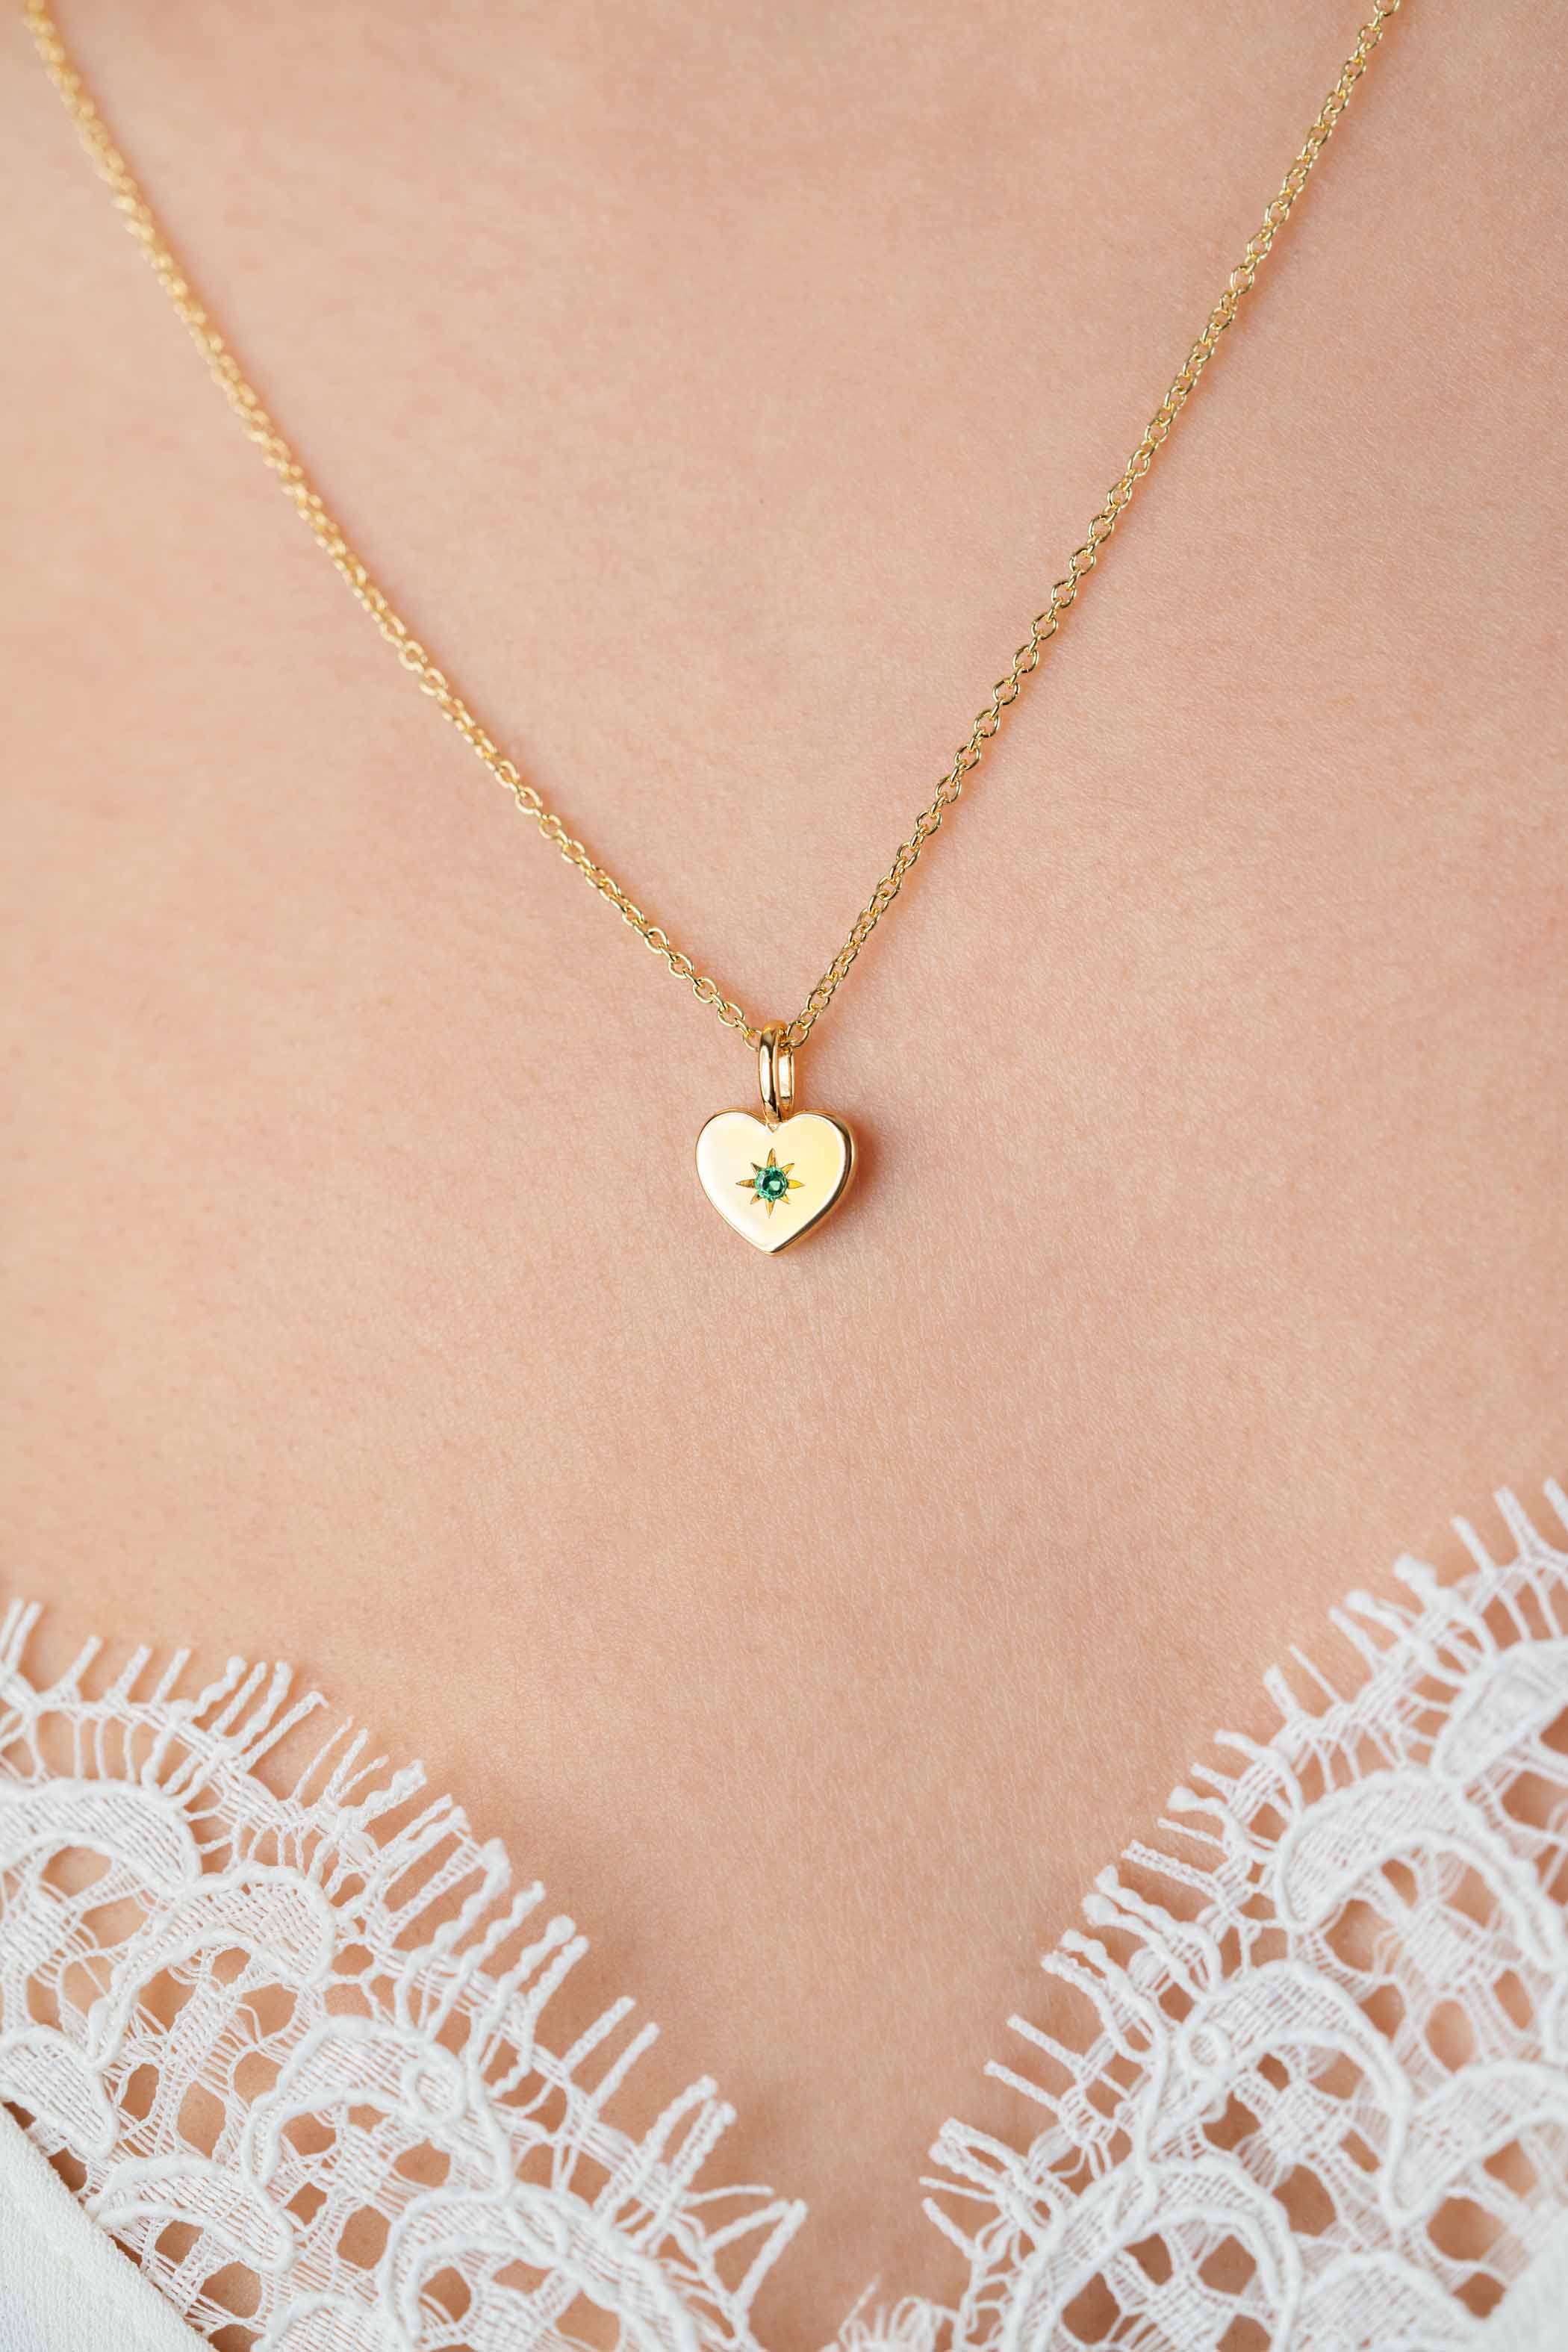 MAY Pendant 12mm Gold Plated Heart Birthstone Green Emerald Zirconia (excl. necklace)